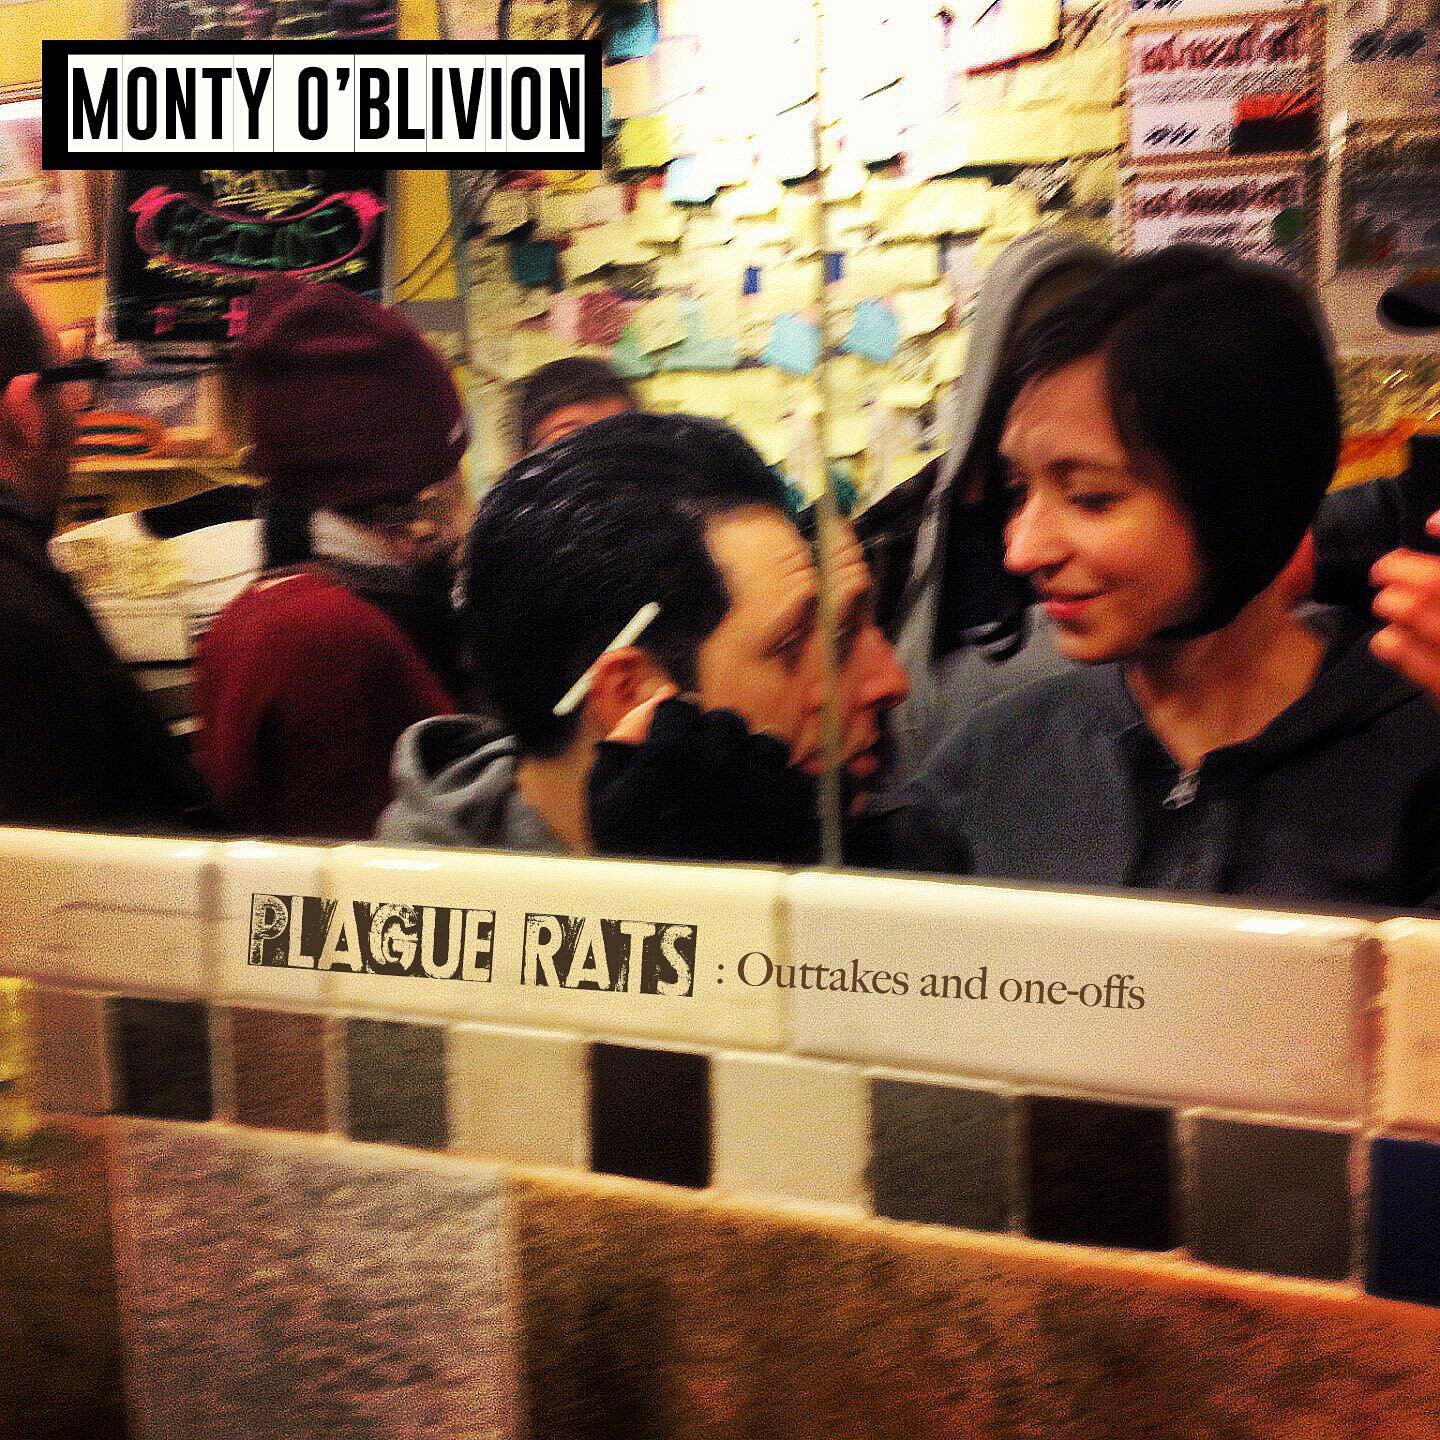 It&rsquo;s the second Wednesday of the month aka #kborwednesday so head over to Bandcamp and download Monty O&rsquo;Blivion&rsquo;s &ldquo;Plague Rats: Outtakes and One-offs&rdquo; collection! 8 tracks of unreleased material, and remixes and reimagin